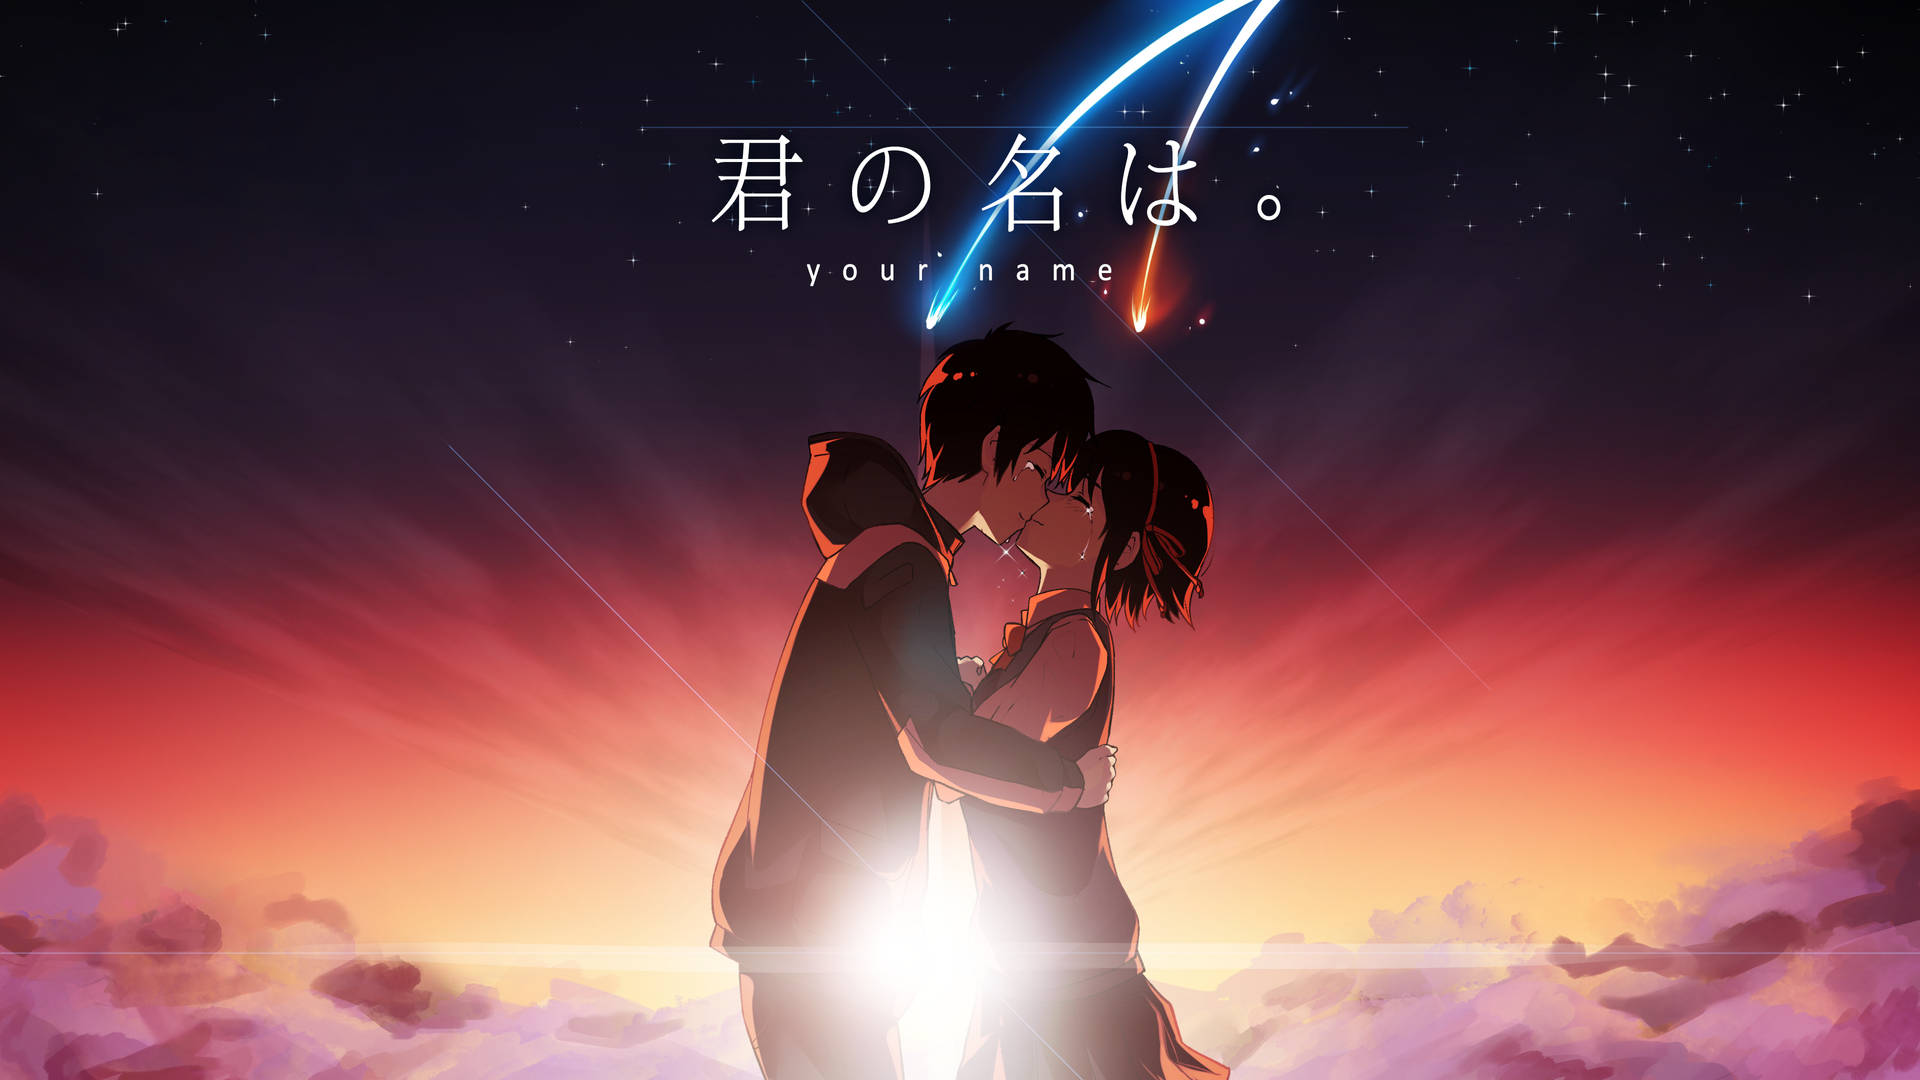 Emotional Kiss Your Name 4k Background